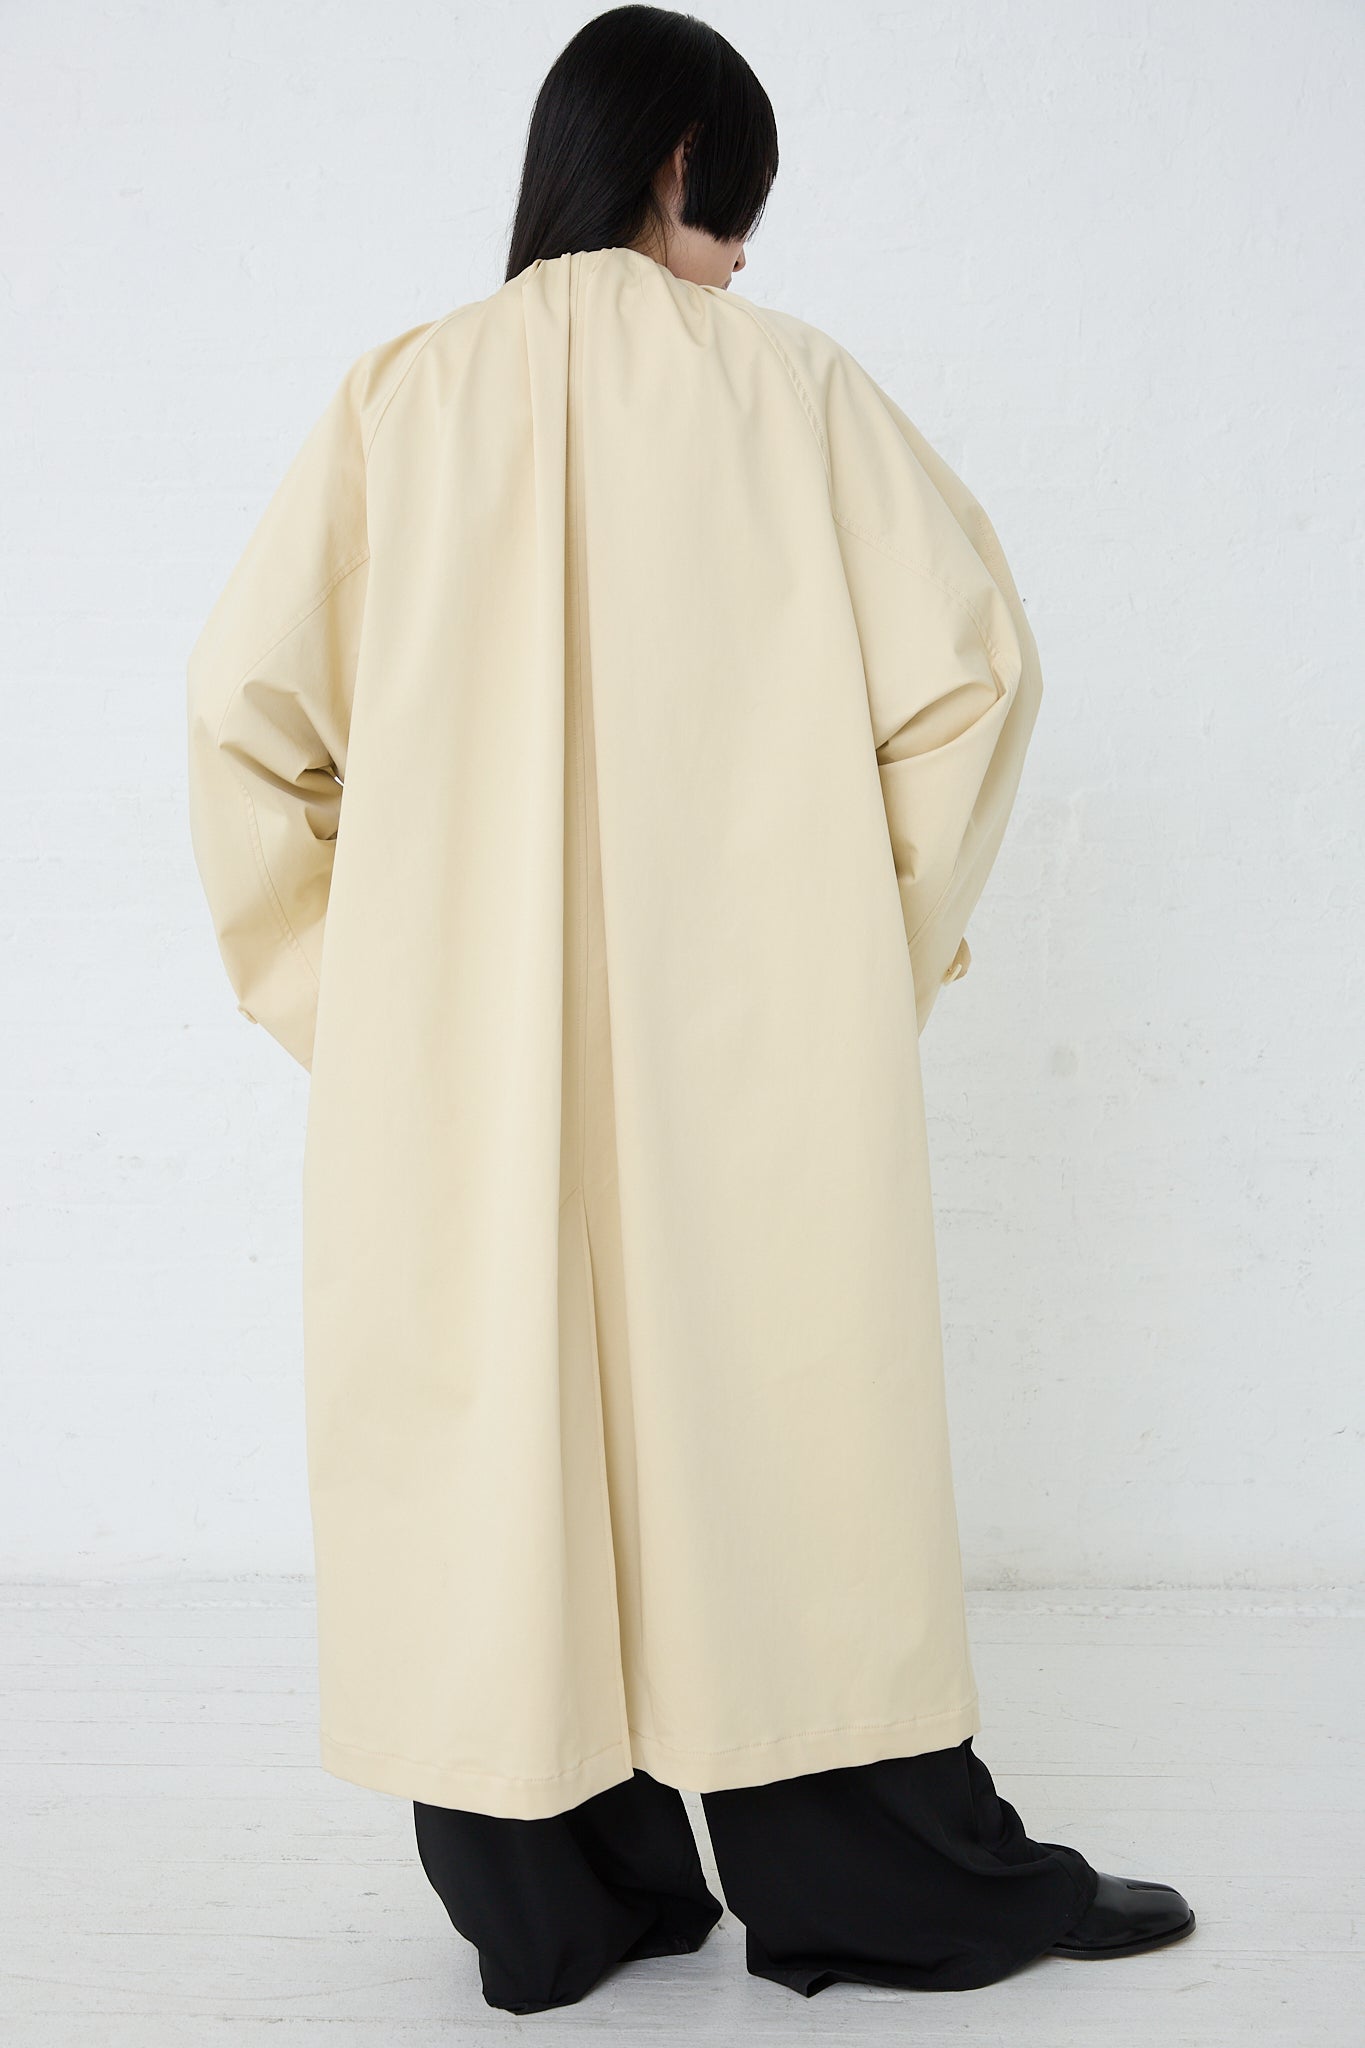 A person in an MM6 Pale Yellow Trench Coat. Back view and full length.